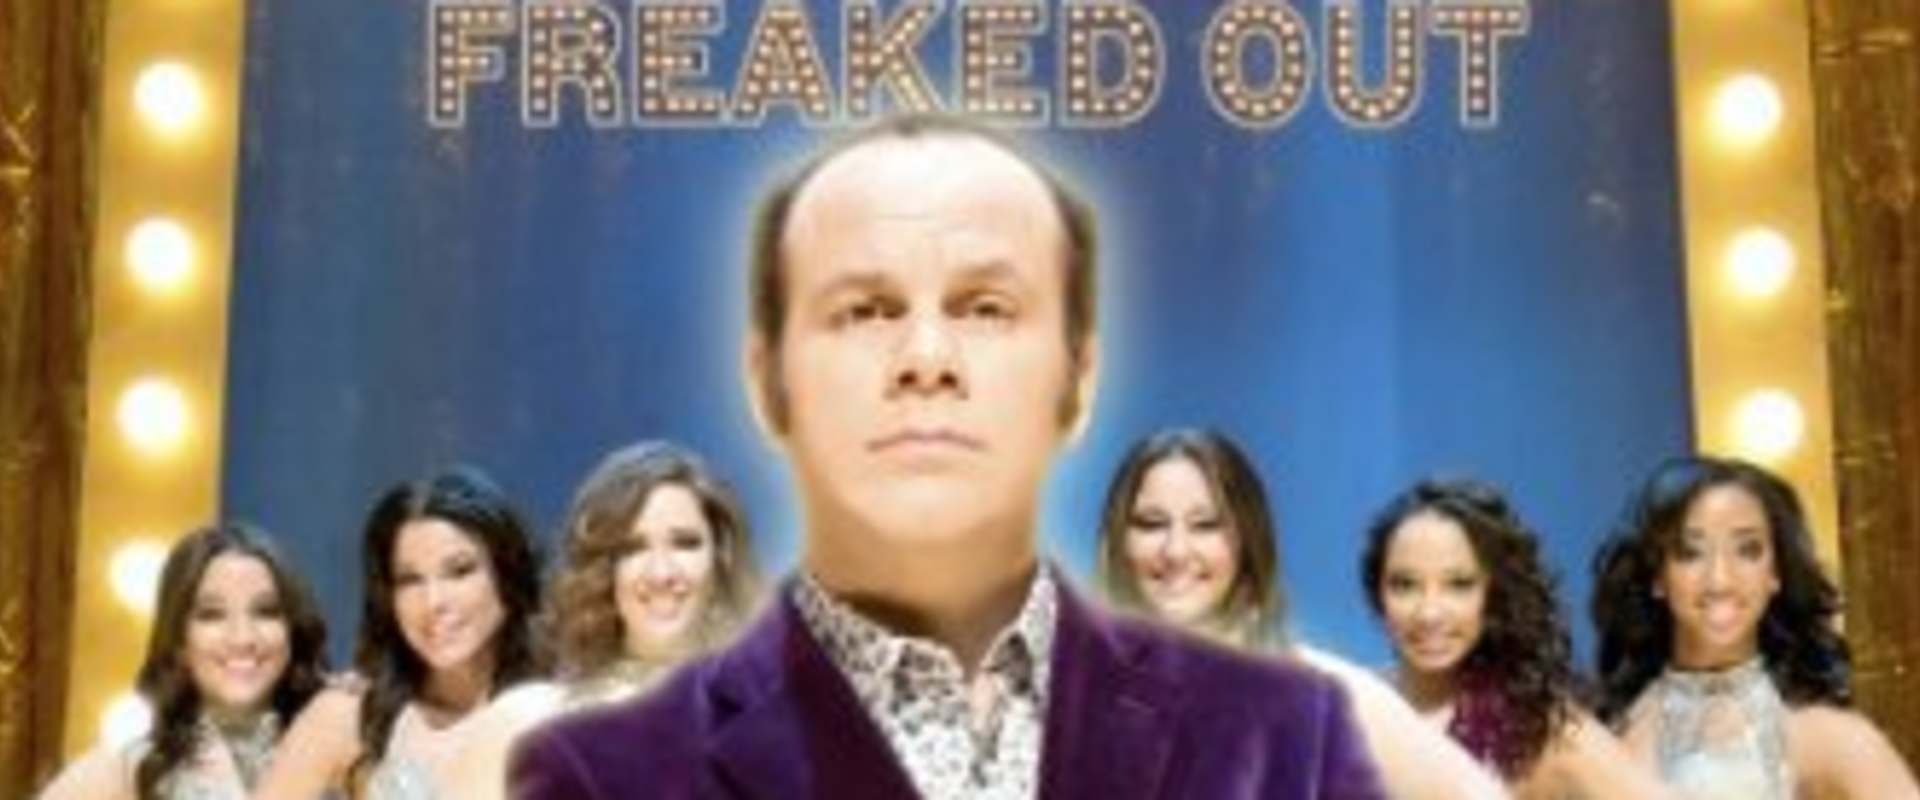 Tom Papa: Freaked Out background 1